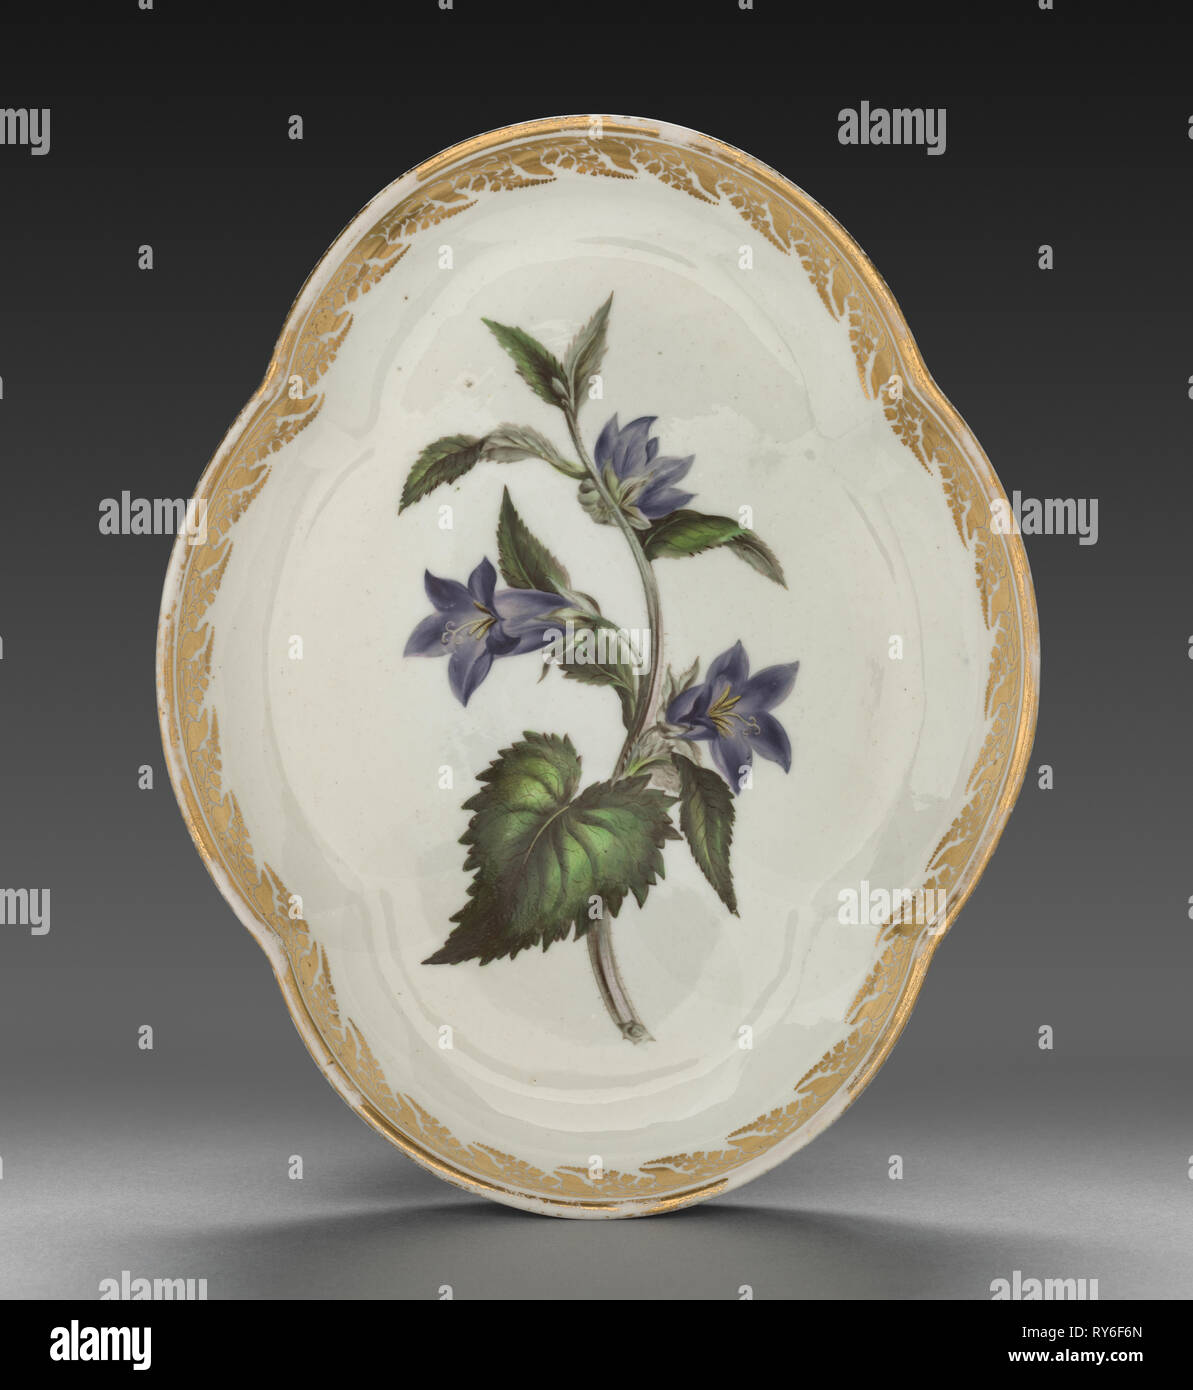 Quatrelobed Dish from Dessert Service: Nettle-leaved Bell Flower, c. 1800. Derby (Crown Derby Period) (British). Porcelain; overall: 3.9 x 25.6 x 20.4 cm (1 9/16 x 10 1/16 x 8 1/16 in Stock Photo